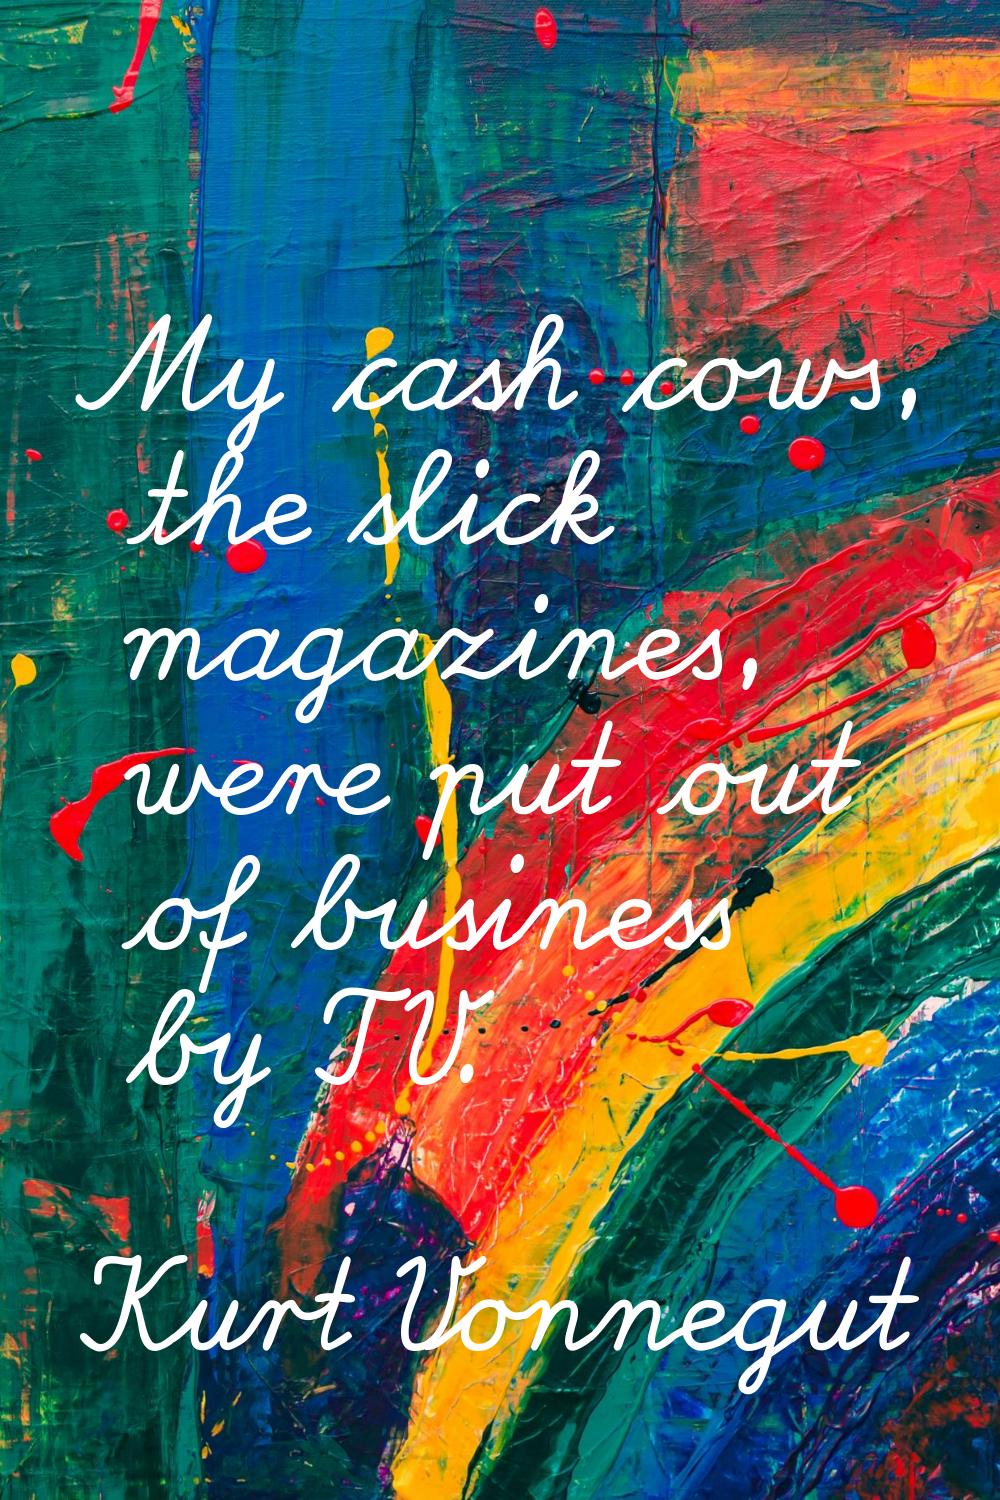 My cash cows, the slick magazines, were put out of business by TV.